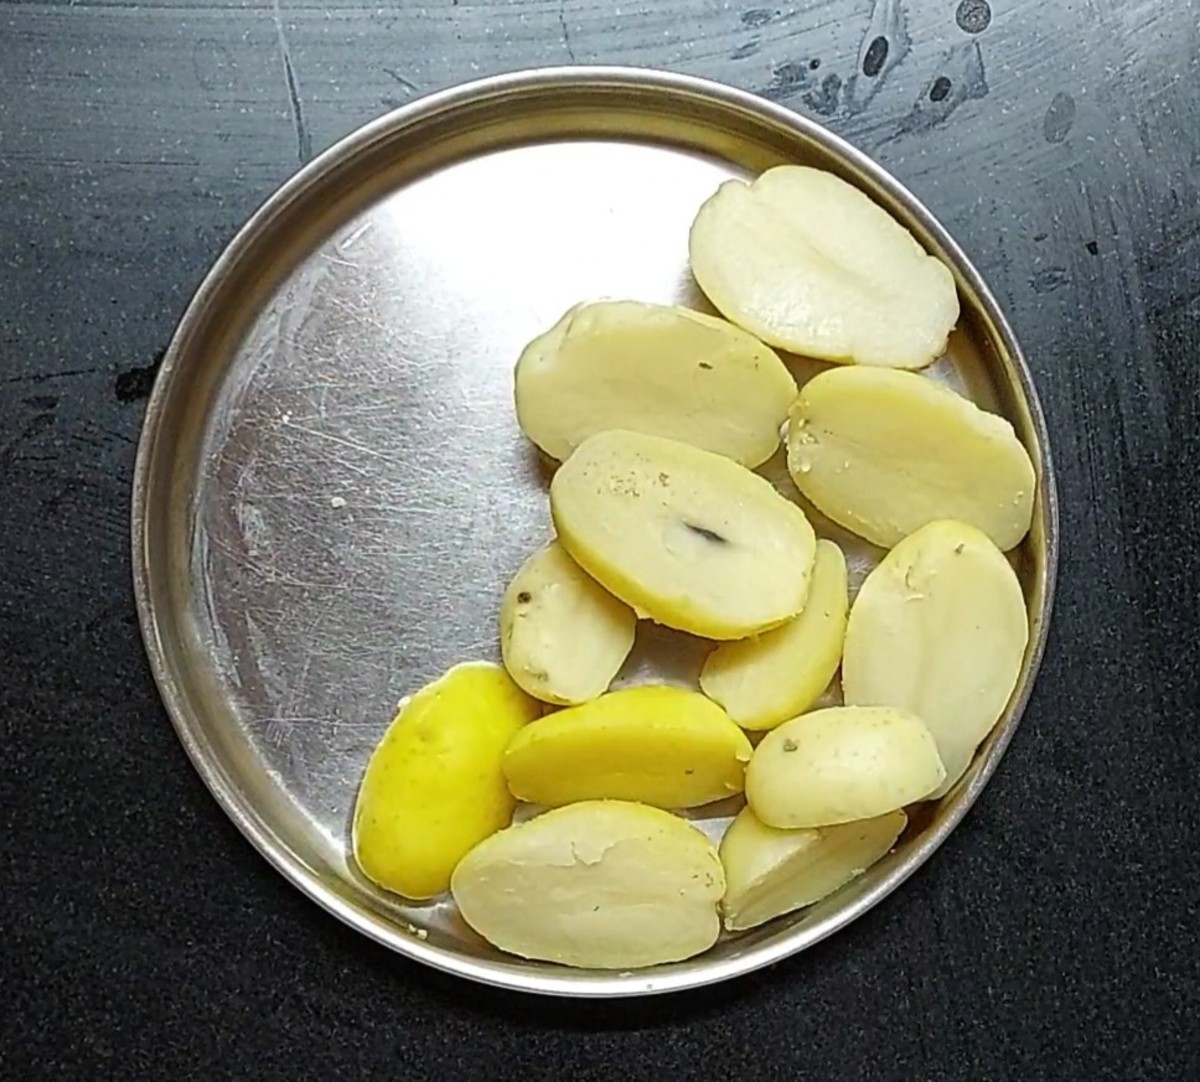 After the pressure of the cooker subsides, transfer the cooked potatoes to a plate and let them cool down. After cooling down, peel off the skins.